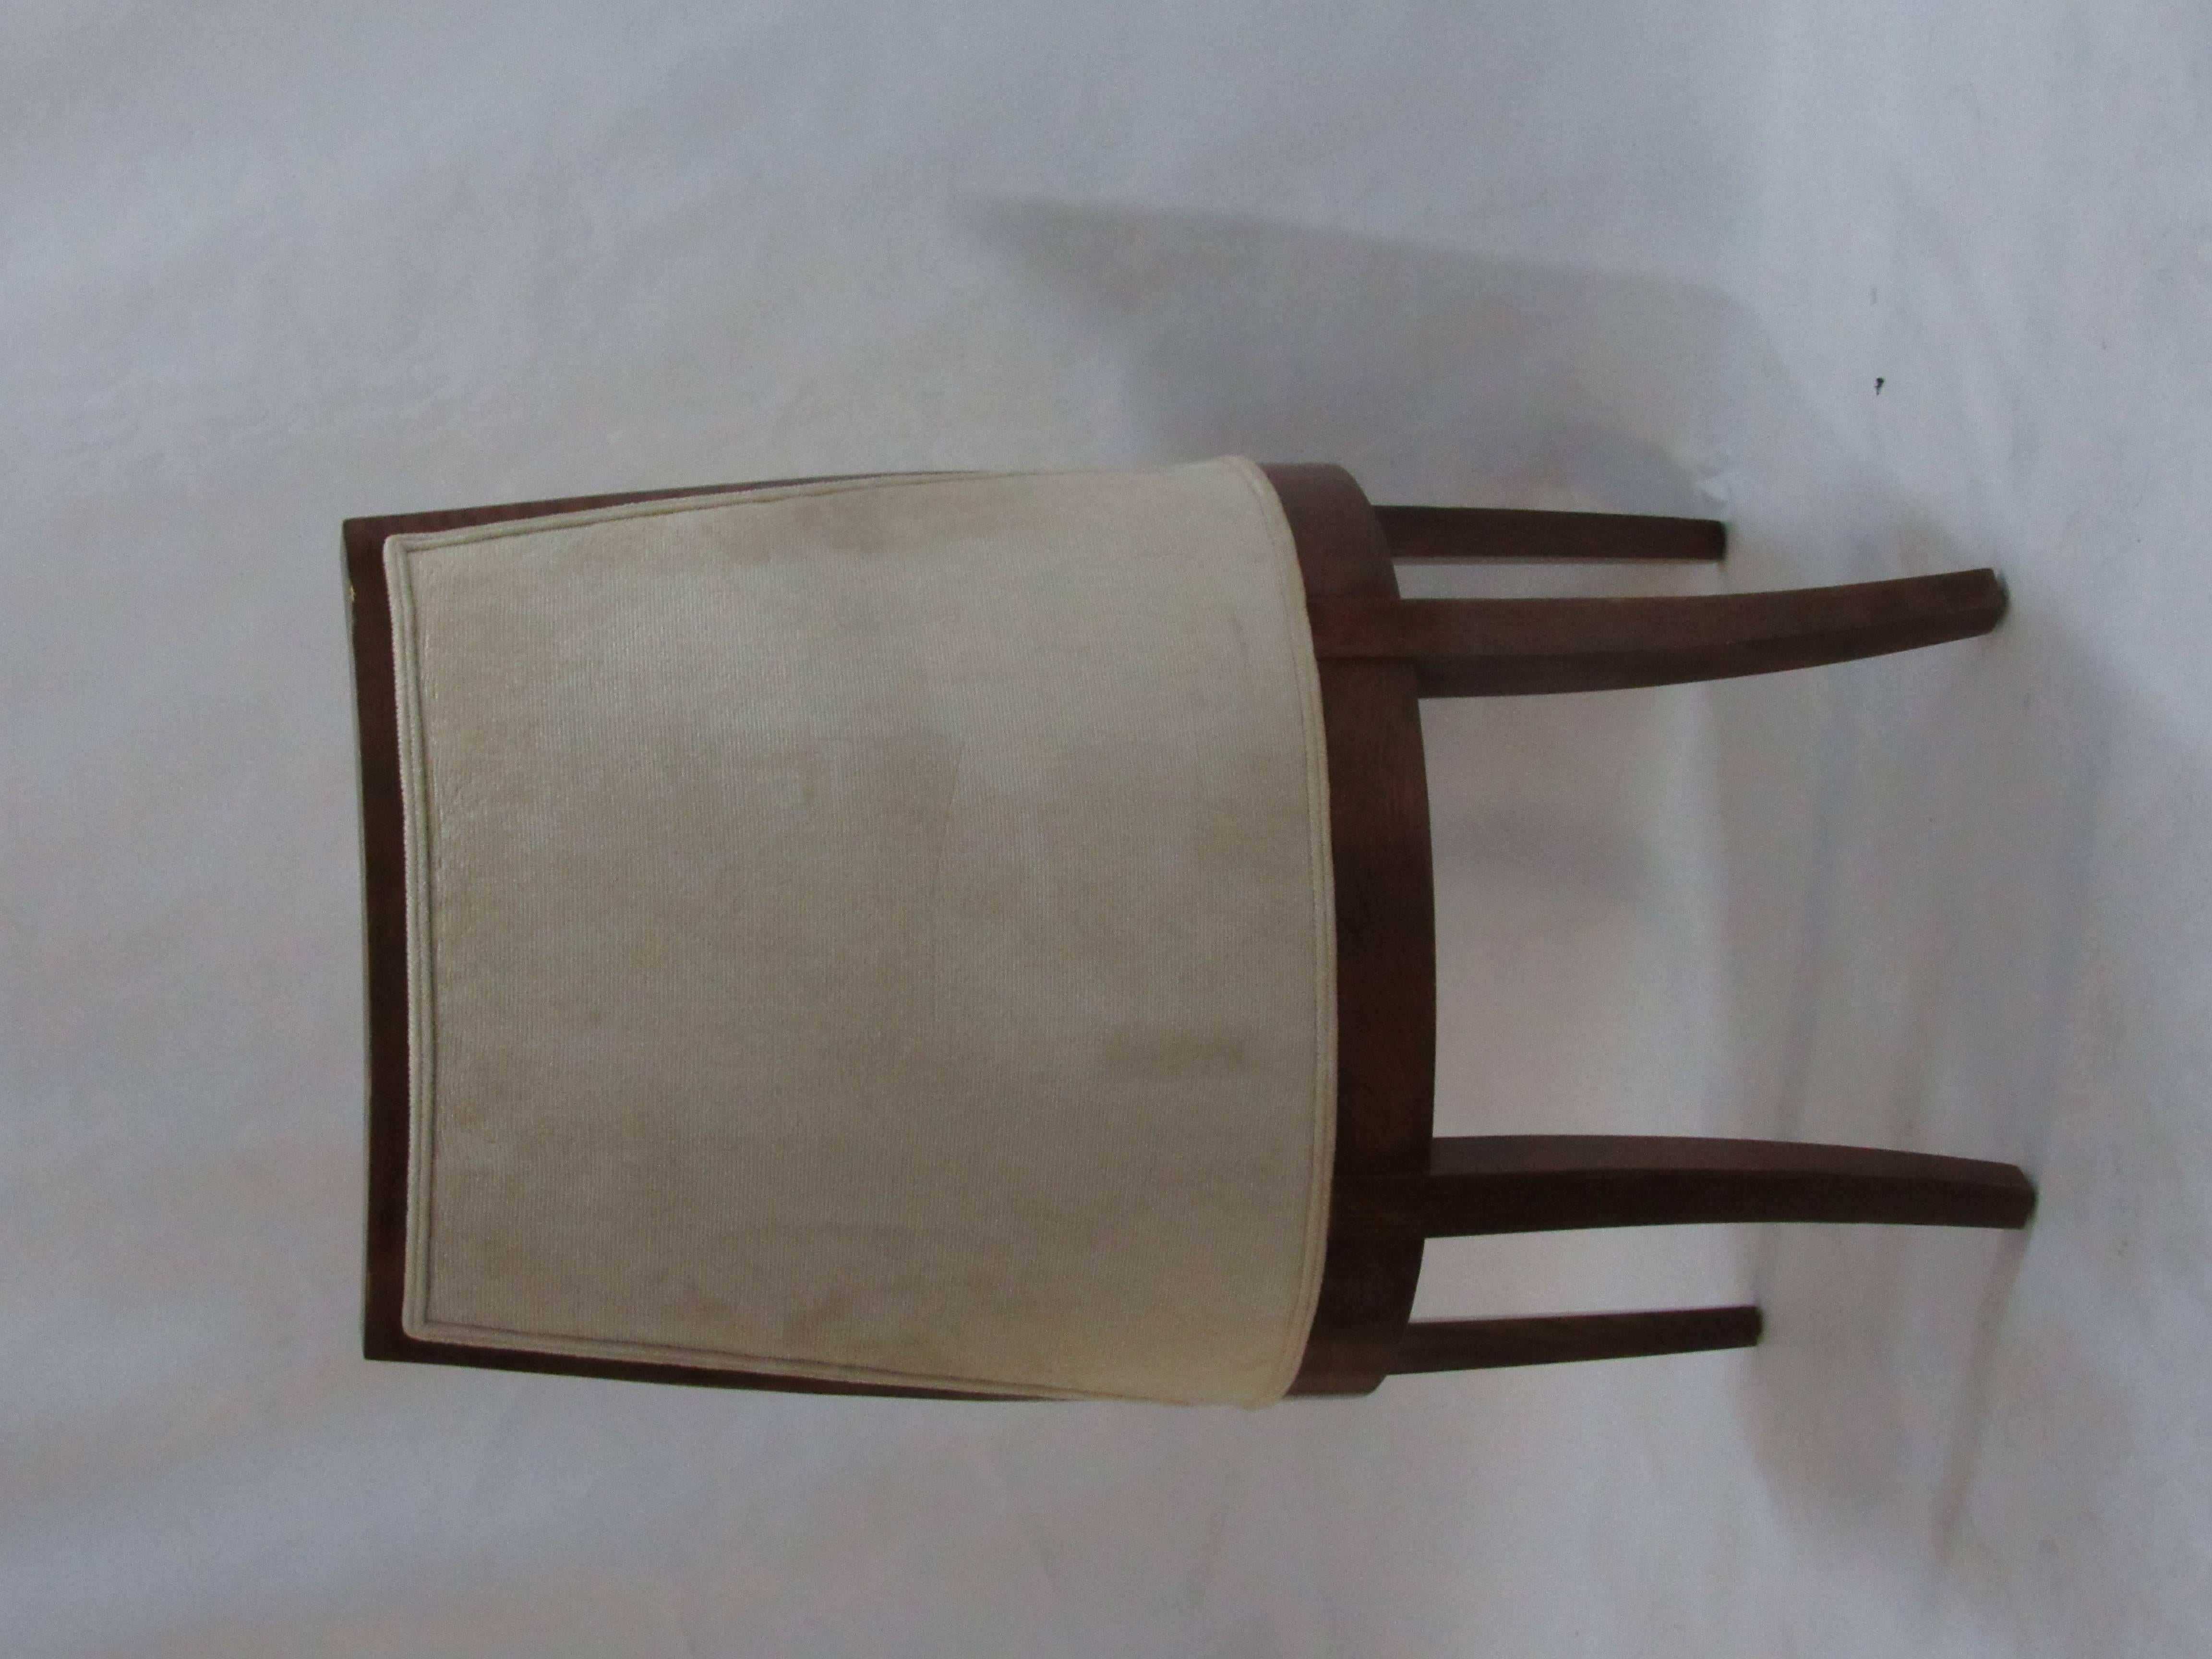 Carved Contemporary Ram's Chair Created by J. Robert Scott Designed by Peter Marino For Sale